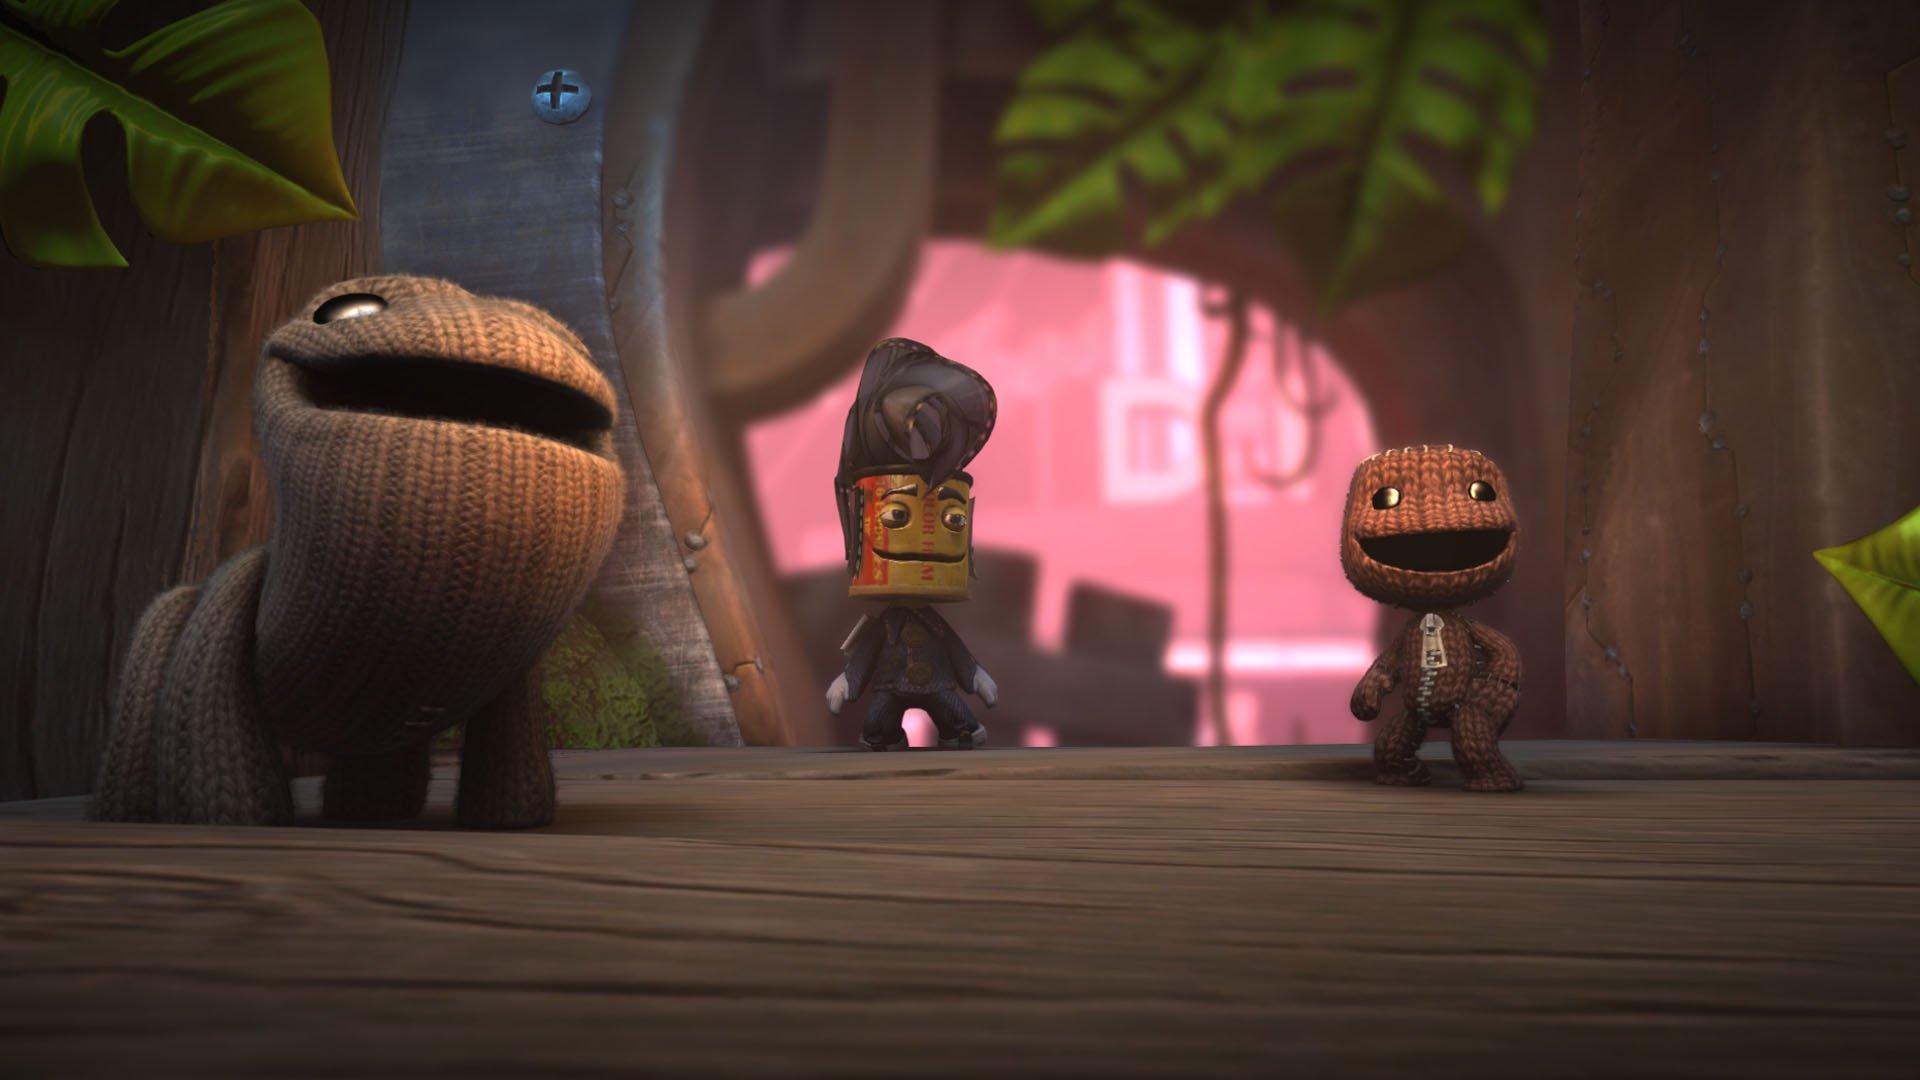 my little big planet ps4